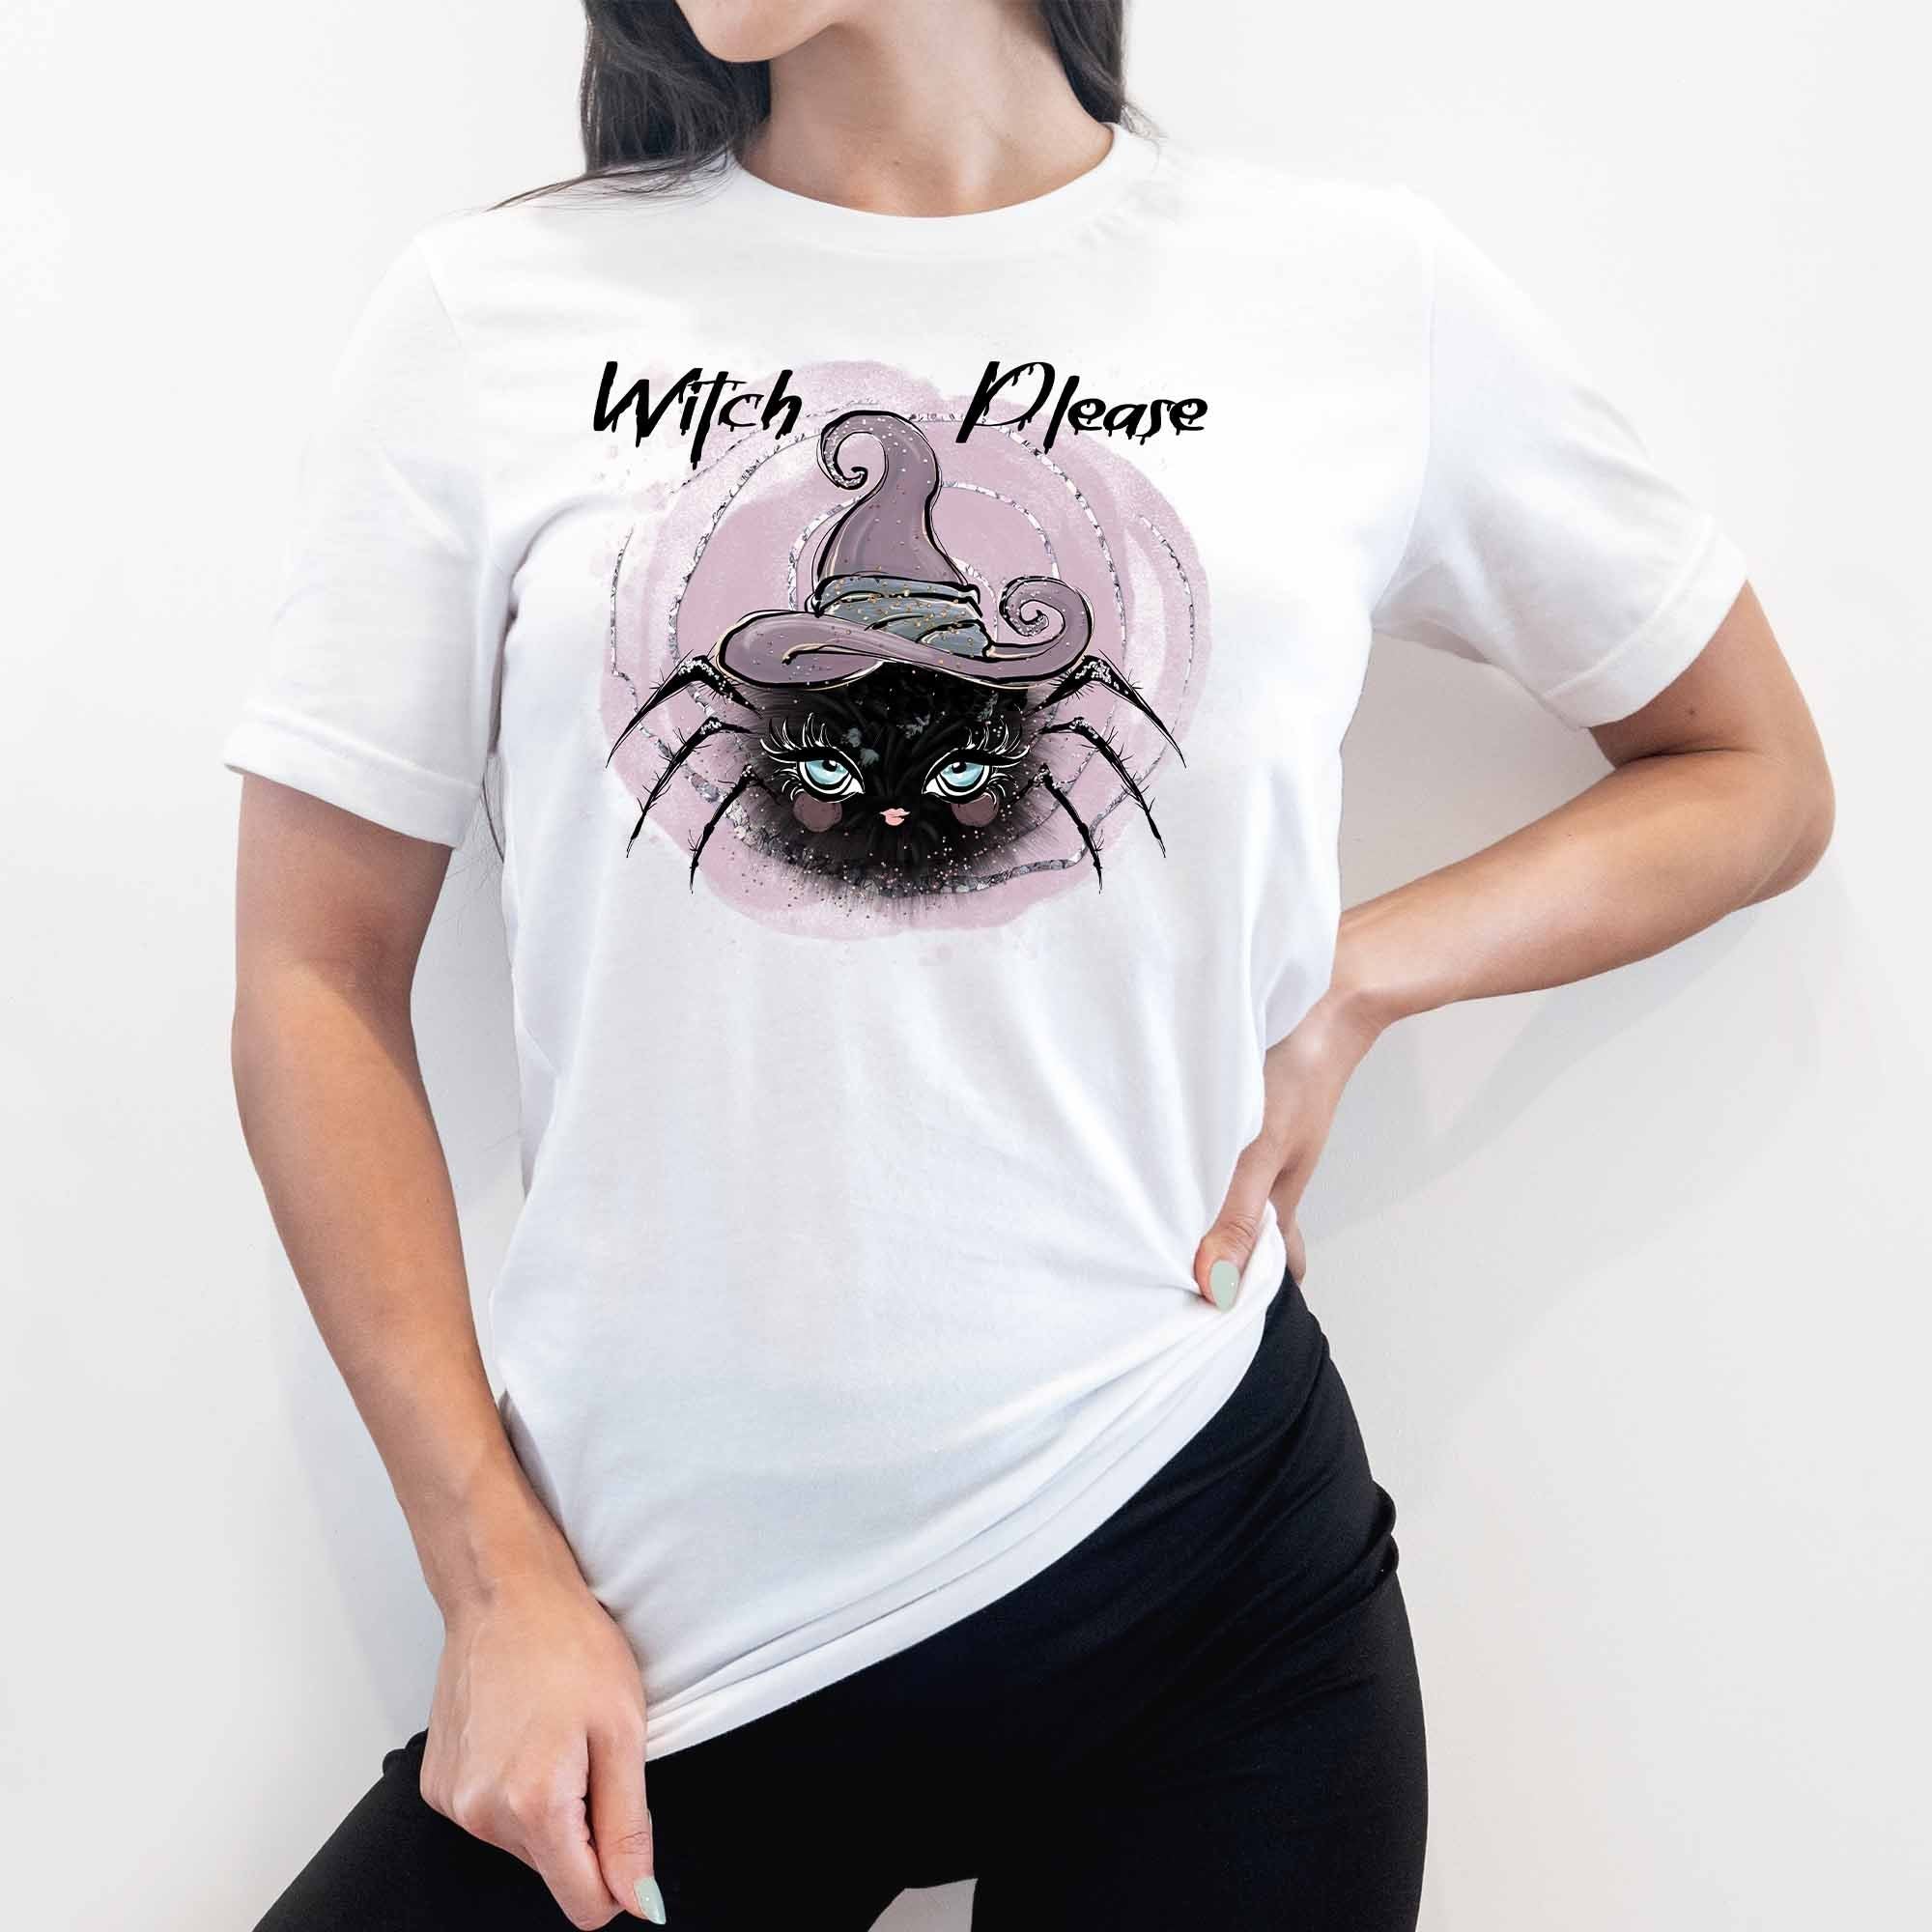 Witch Please Graphic Tee - My Custom Tee Party